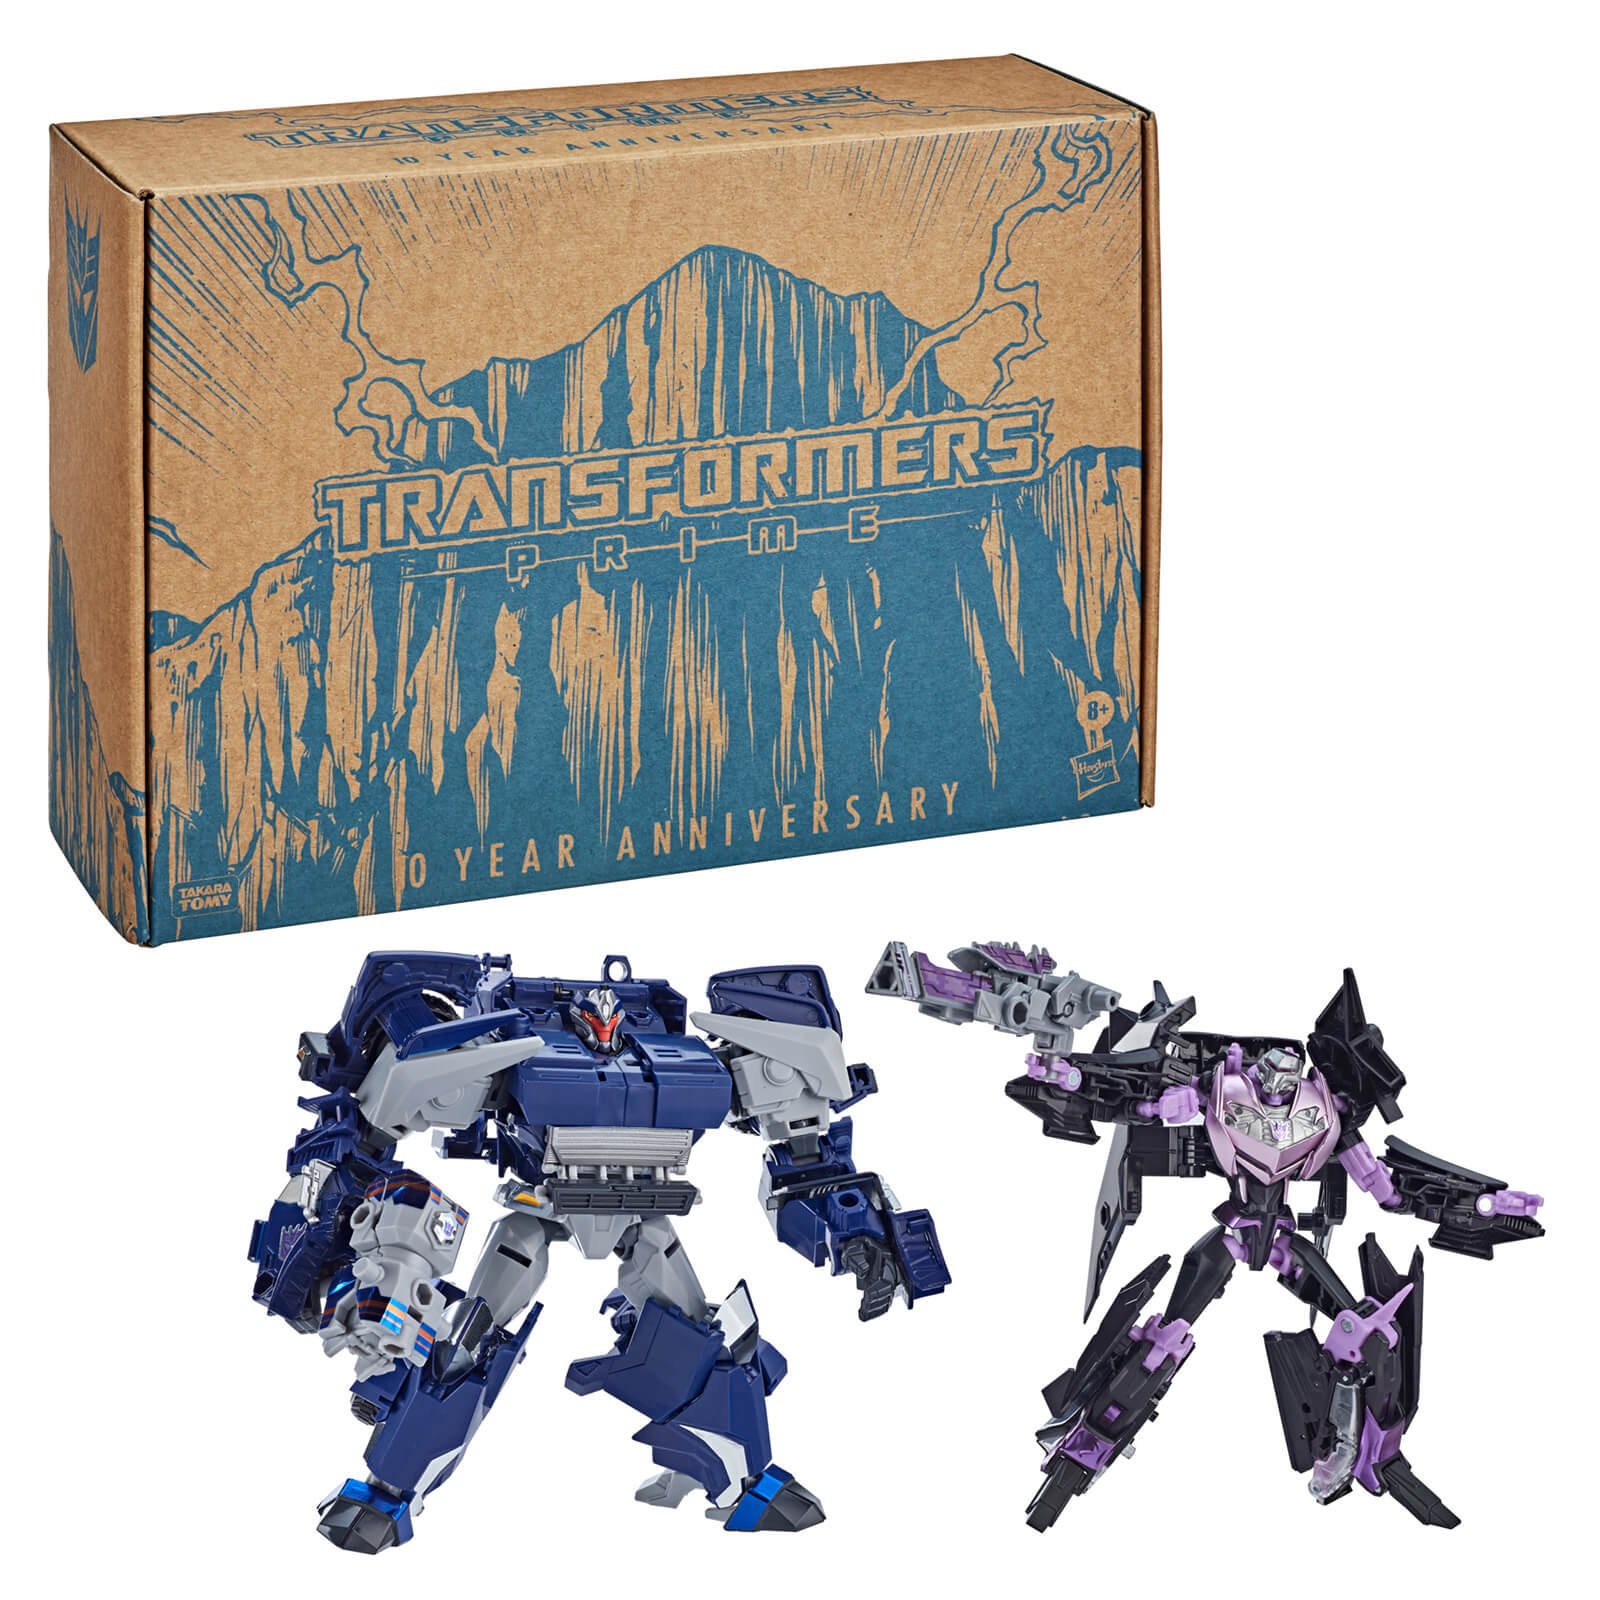 Hasbro Transformers: Prime War Breakdown and Vehicon 2-Pack Re-Issued Version